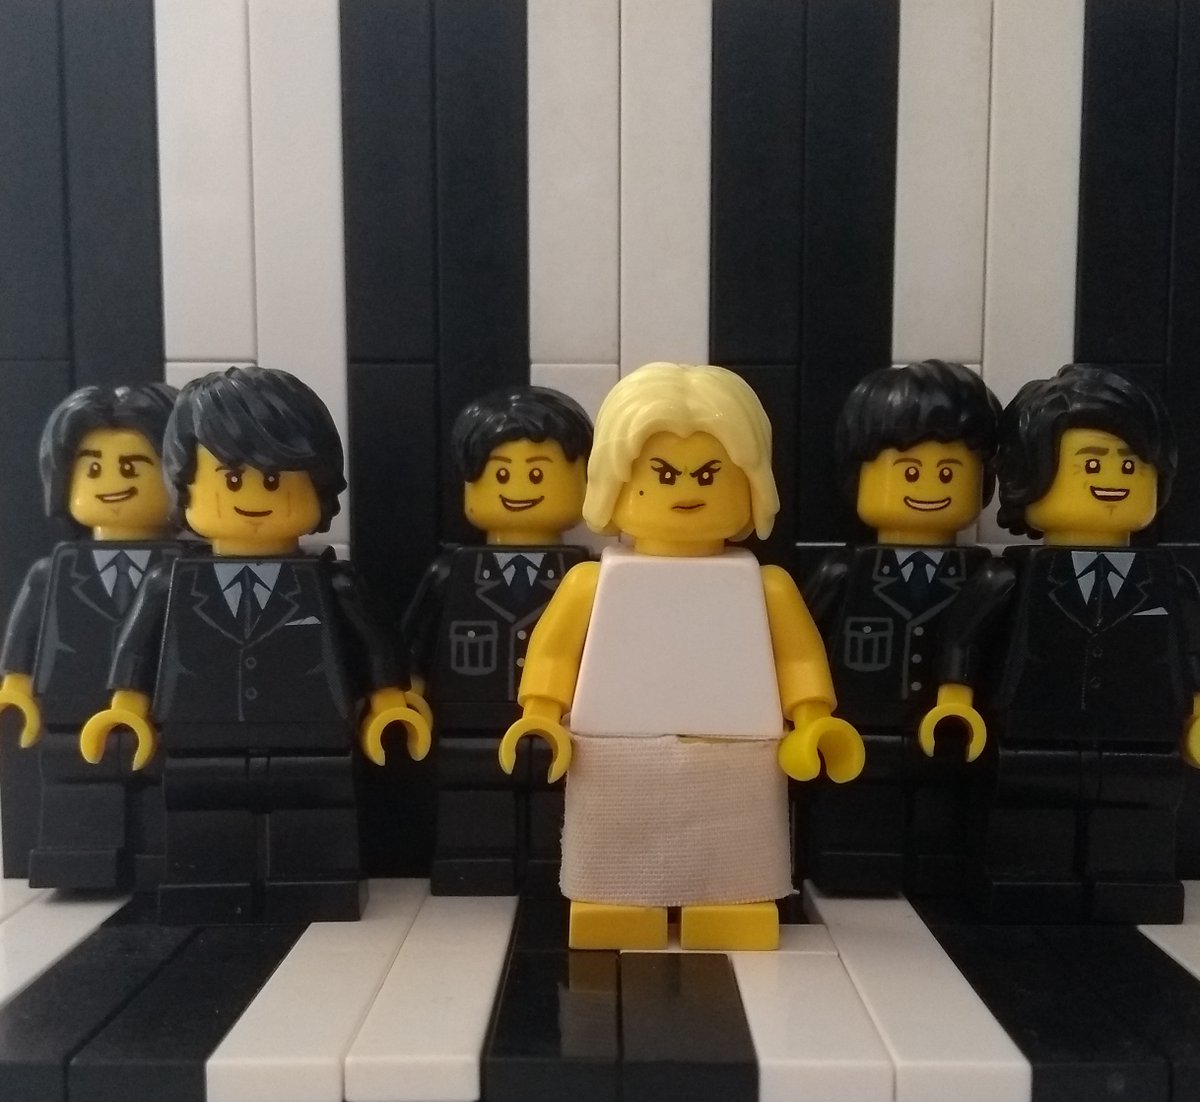 Parallel Lines (1978) - BlondieLego by the fella:  https://flickr.com/photos/franklego/ #Lego